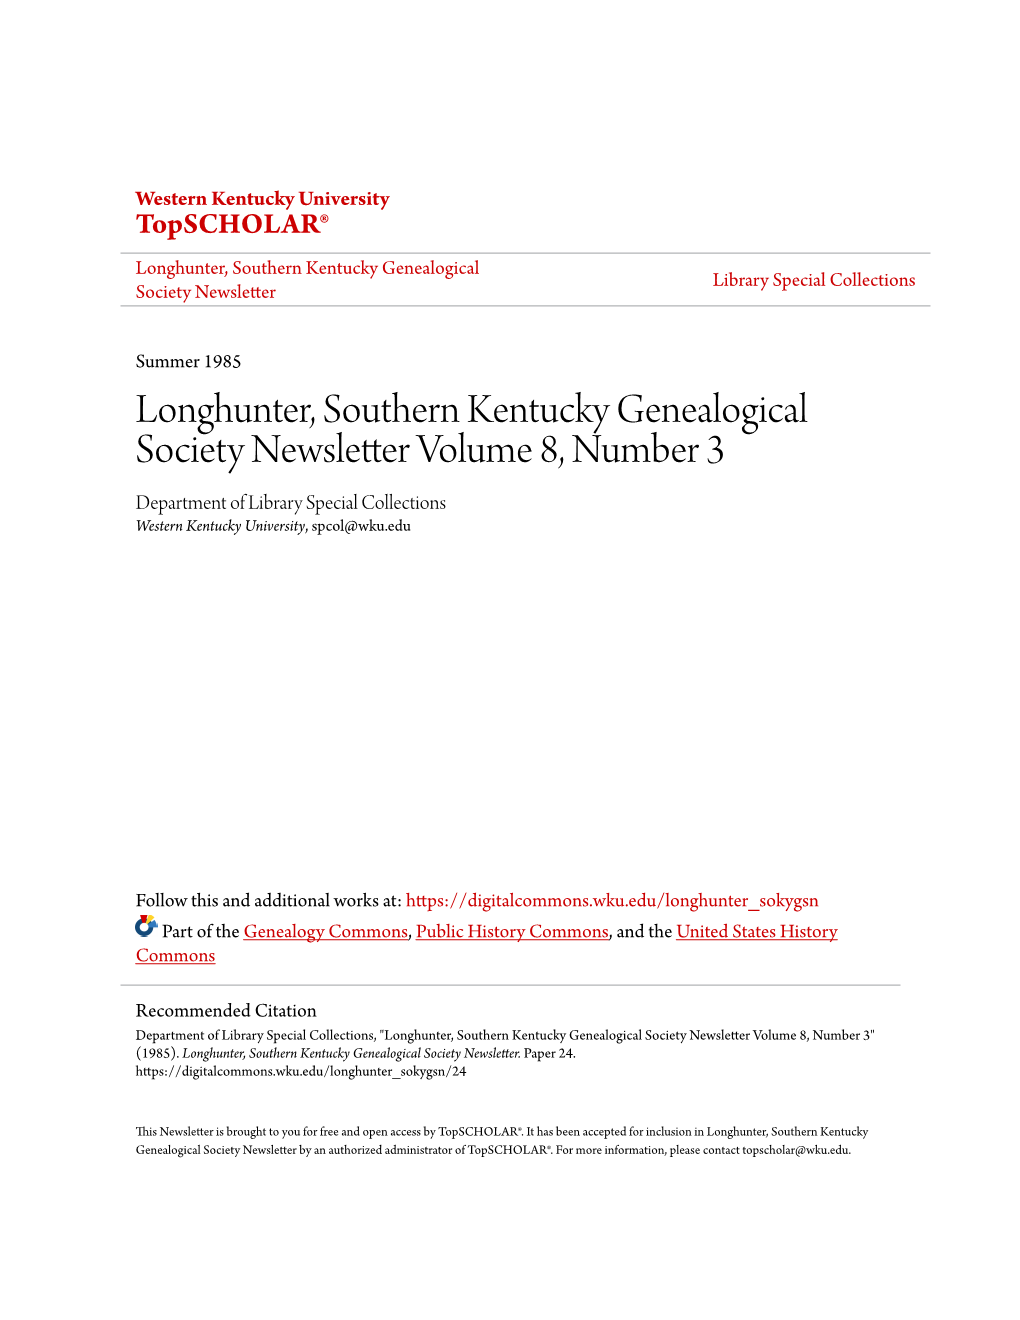 Longhunter, Southern Kentucky Genealogical Society Newsletter Volume 8, Number 3 Department of Library Special Collections Western Kentucky University, Spcol@Wku.Edu